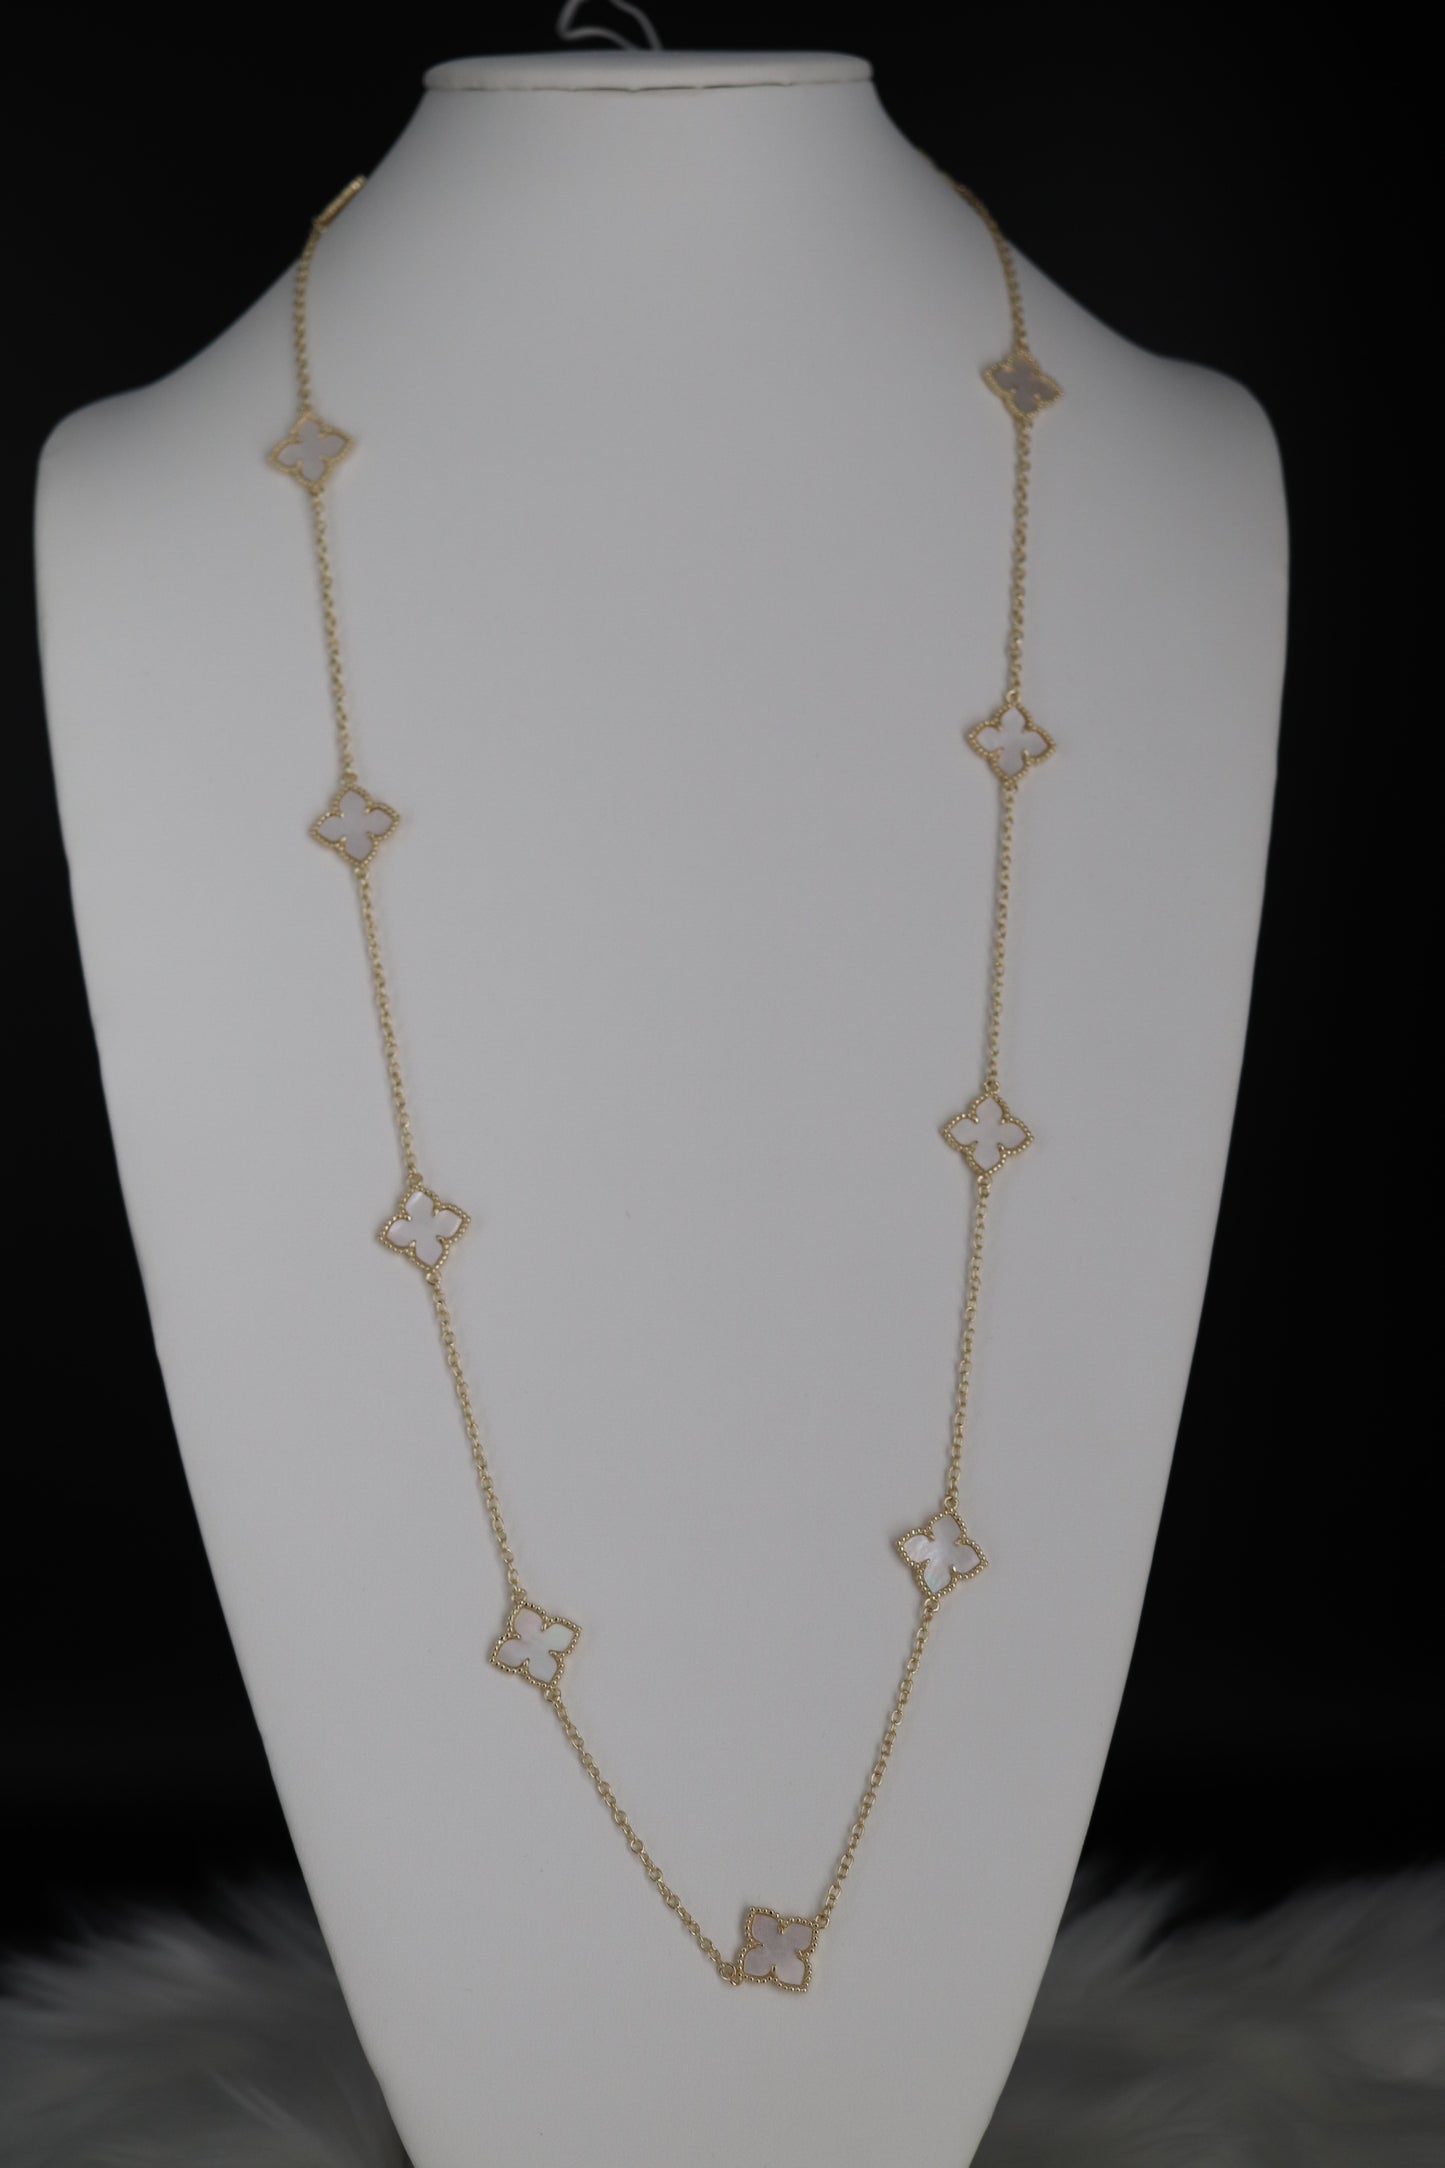 Long Necklace With Medium Size Clover Stations